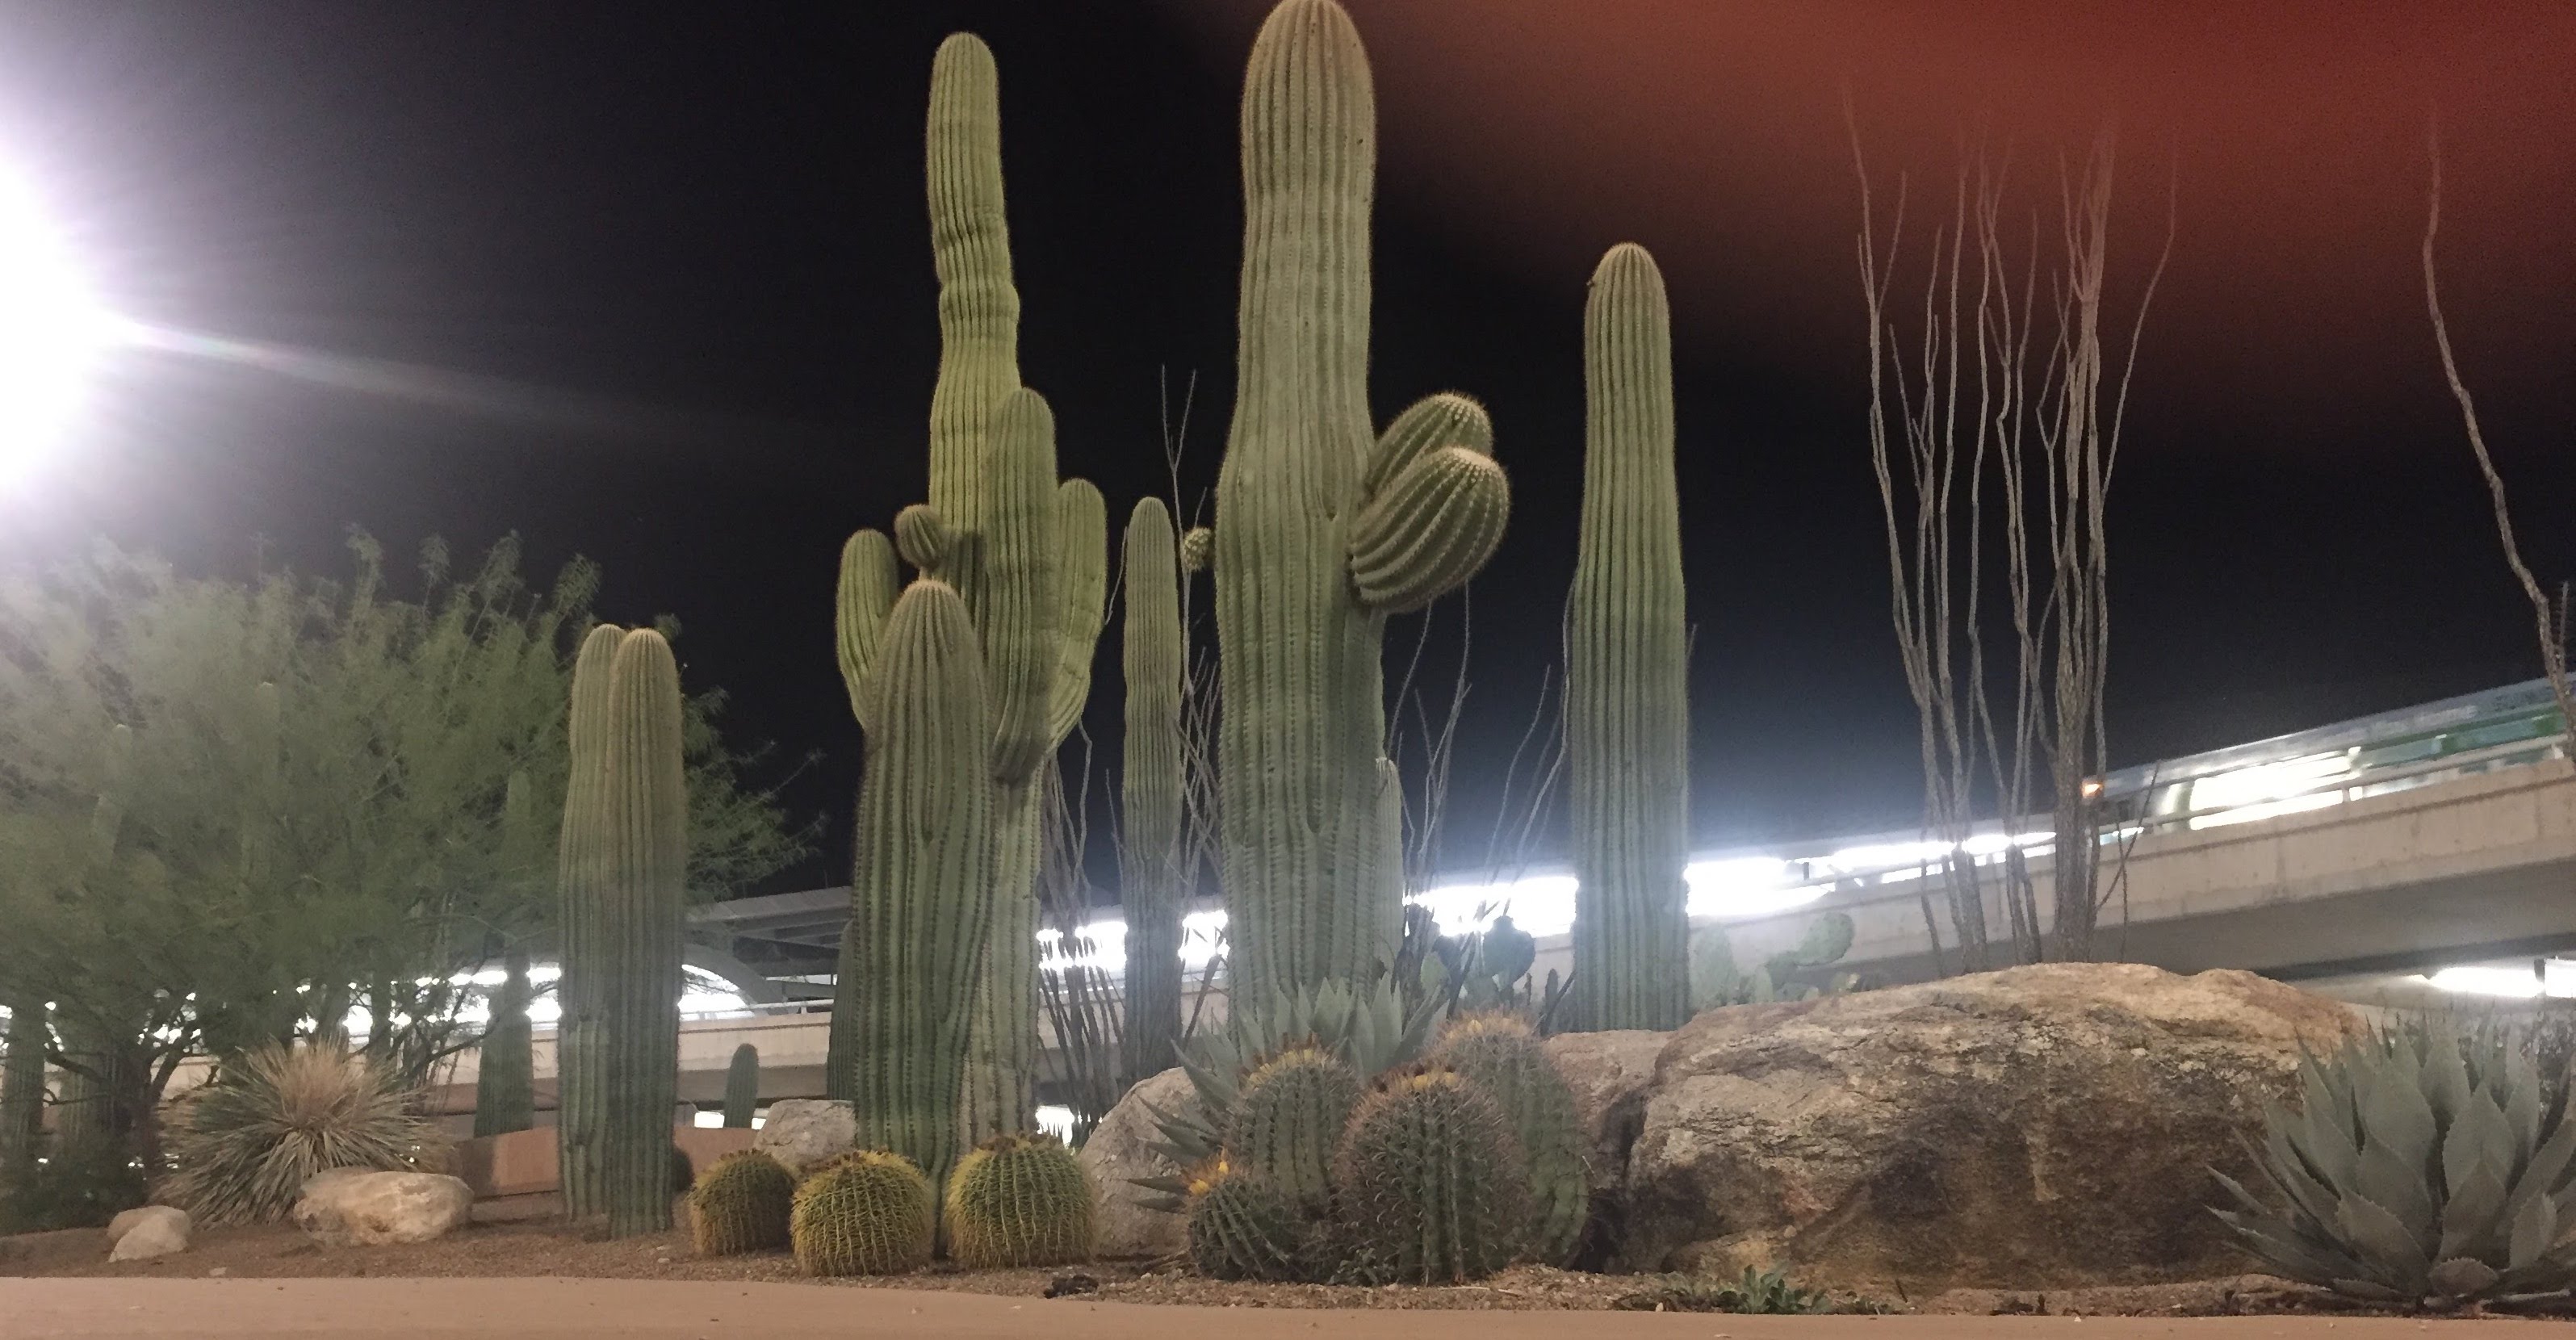 Cacti outside the Tucson Airport